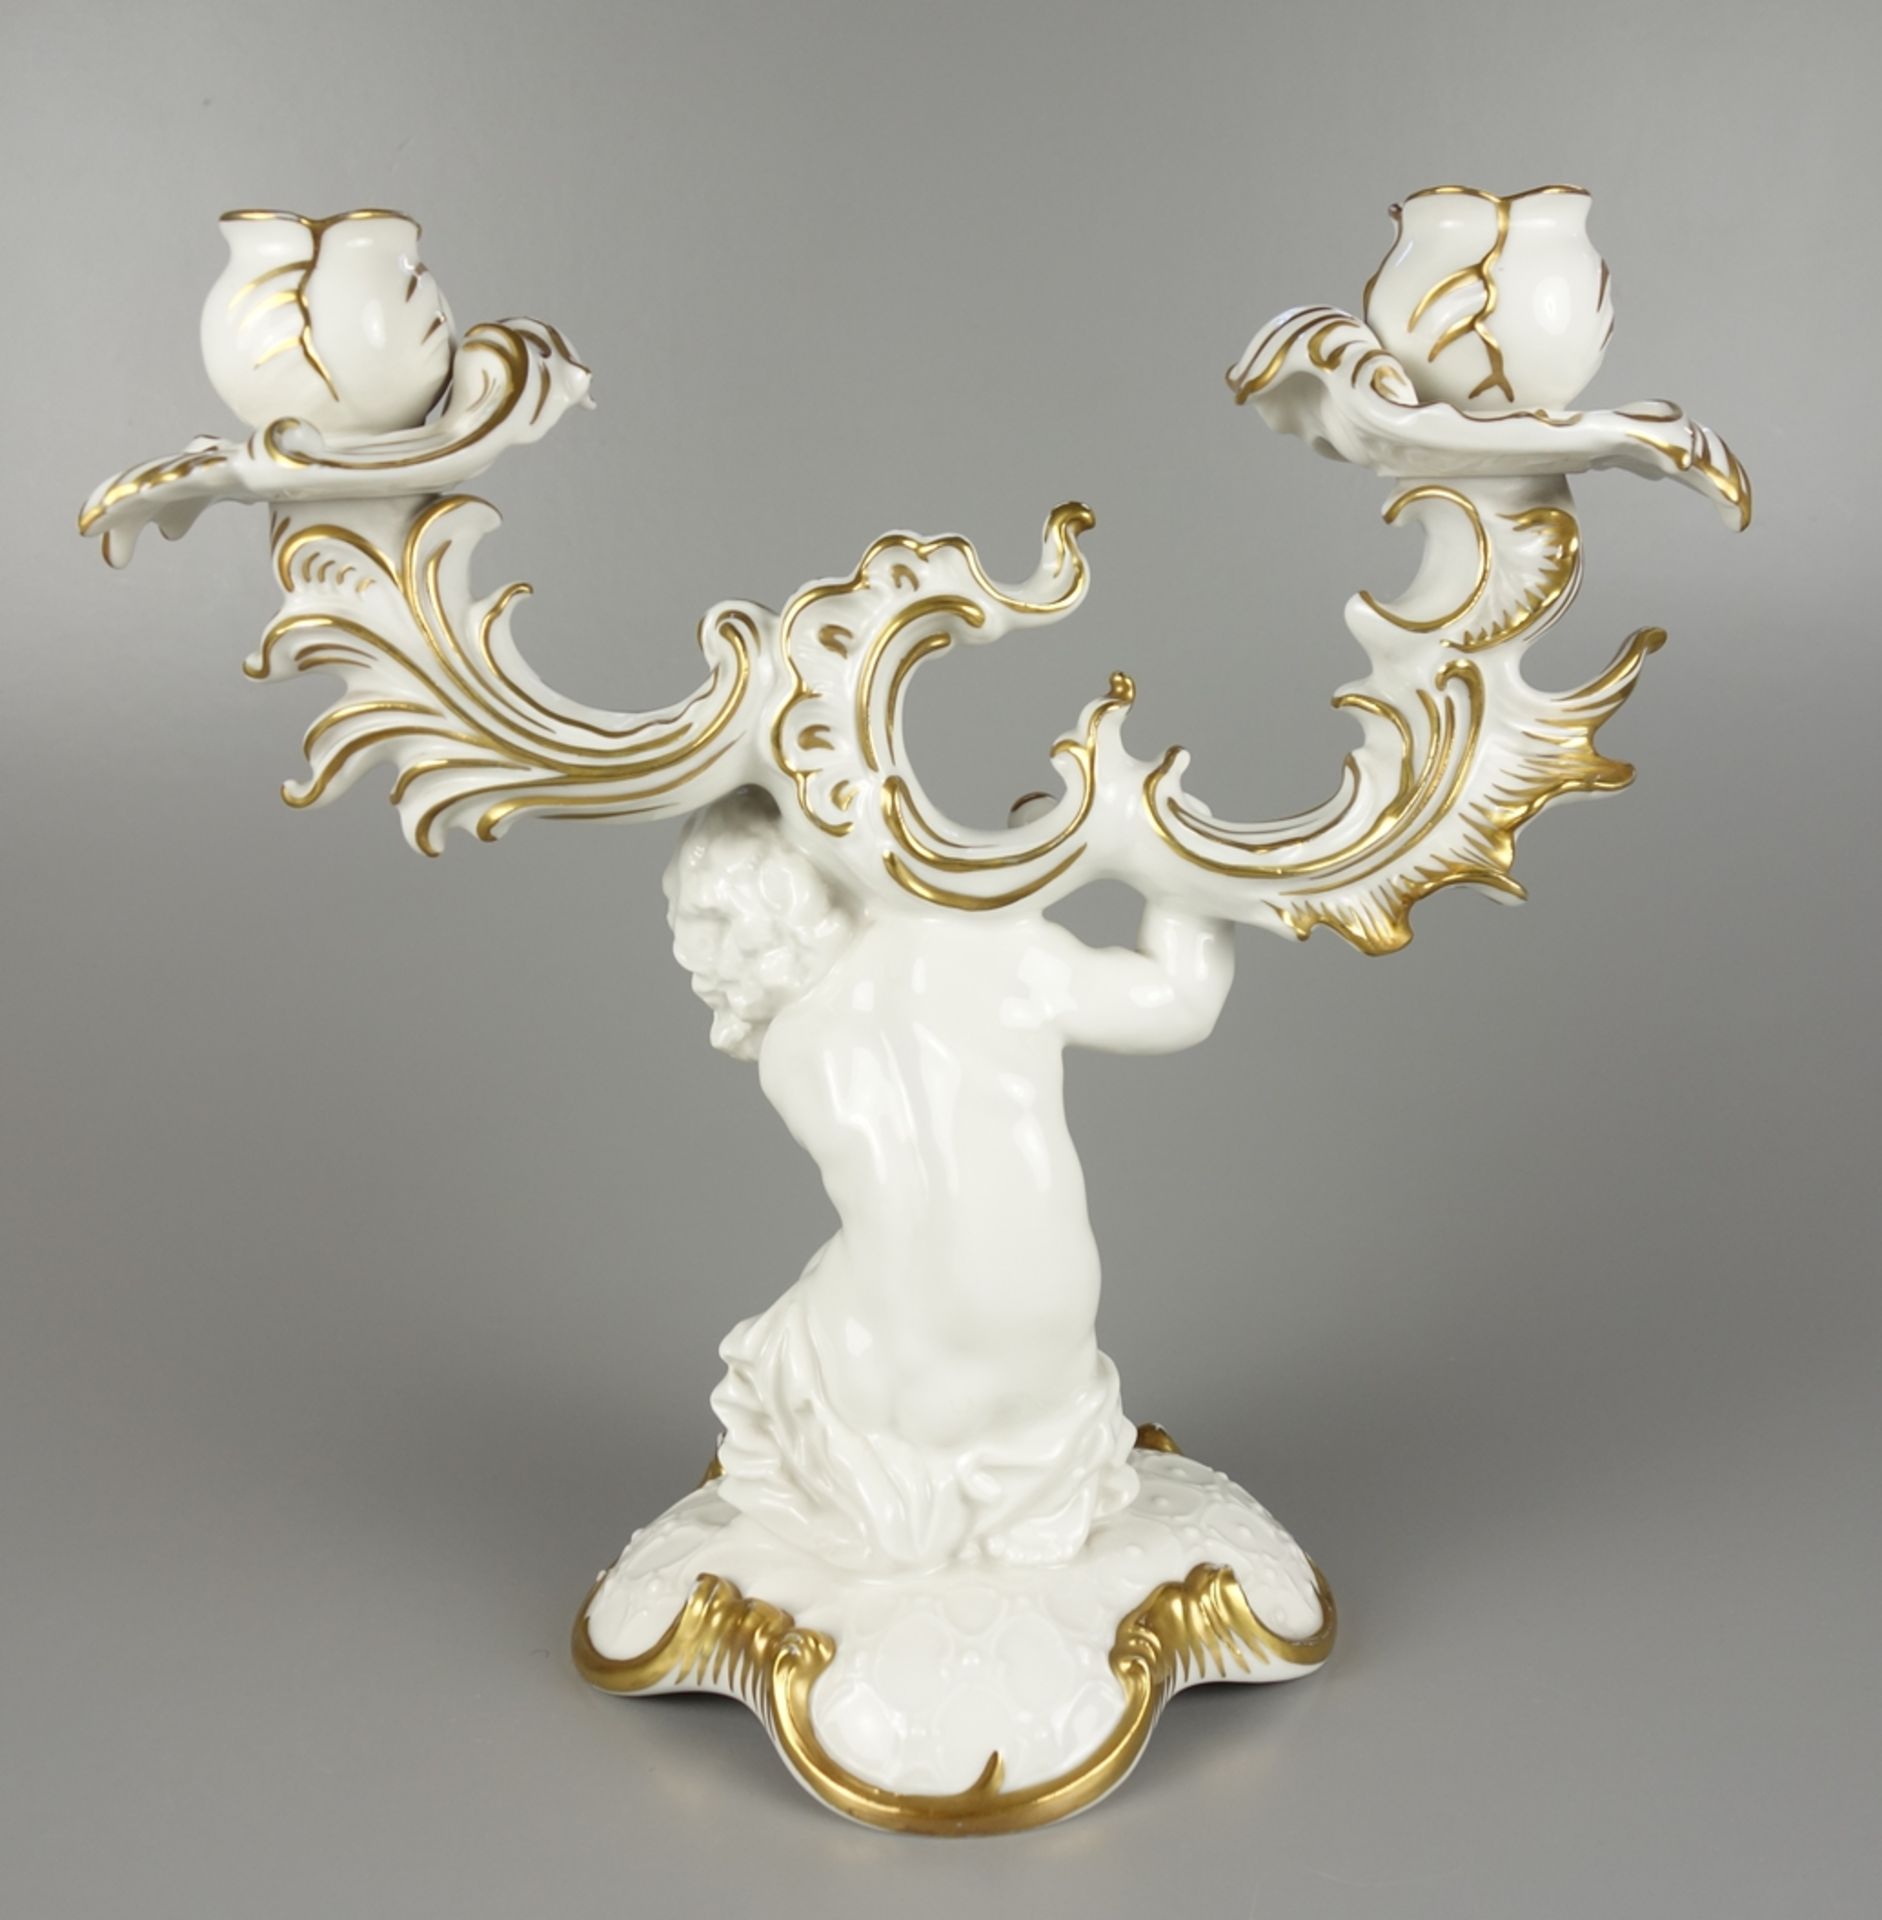 Pair of large figural candlesticks, Karl Tutter for Hutschenreuther, 1930s - Image 4 of 7